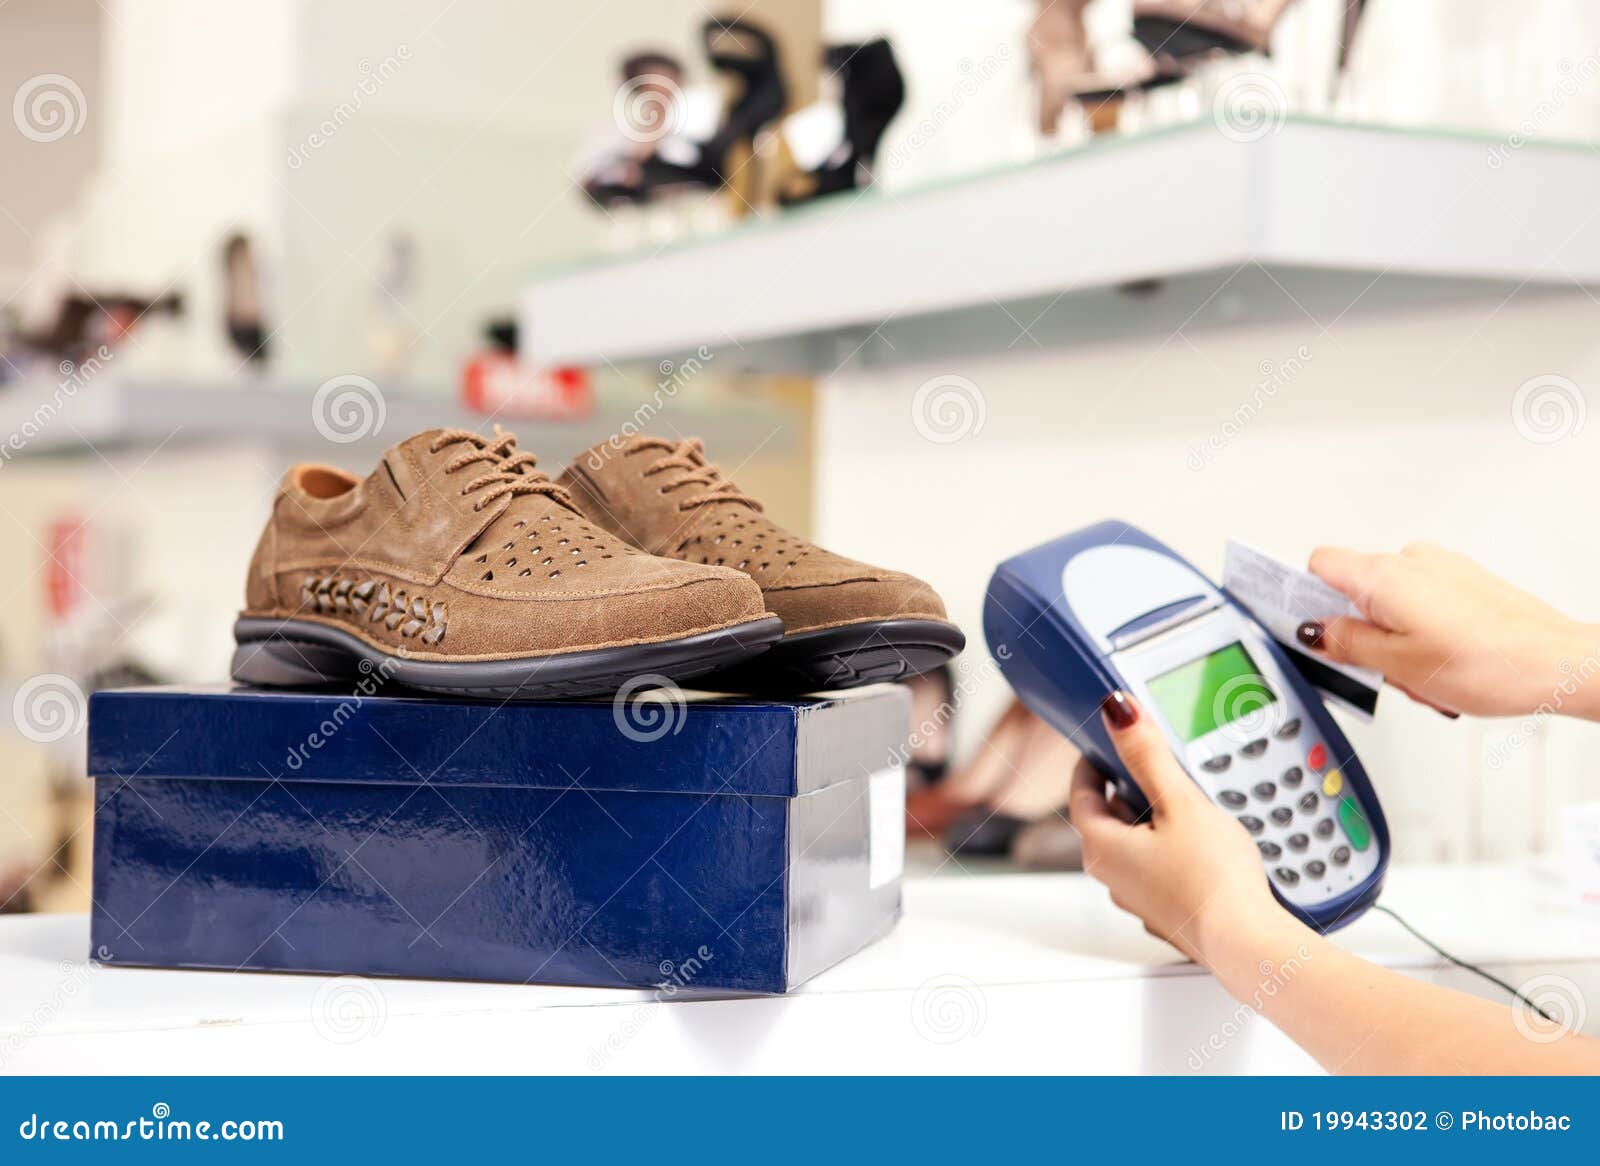 Paying Using Credit Card Terminal In Shoe Store Stock Photo - Image of